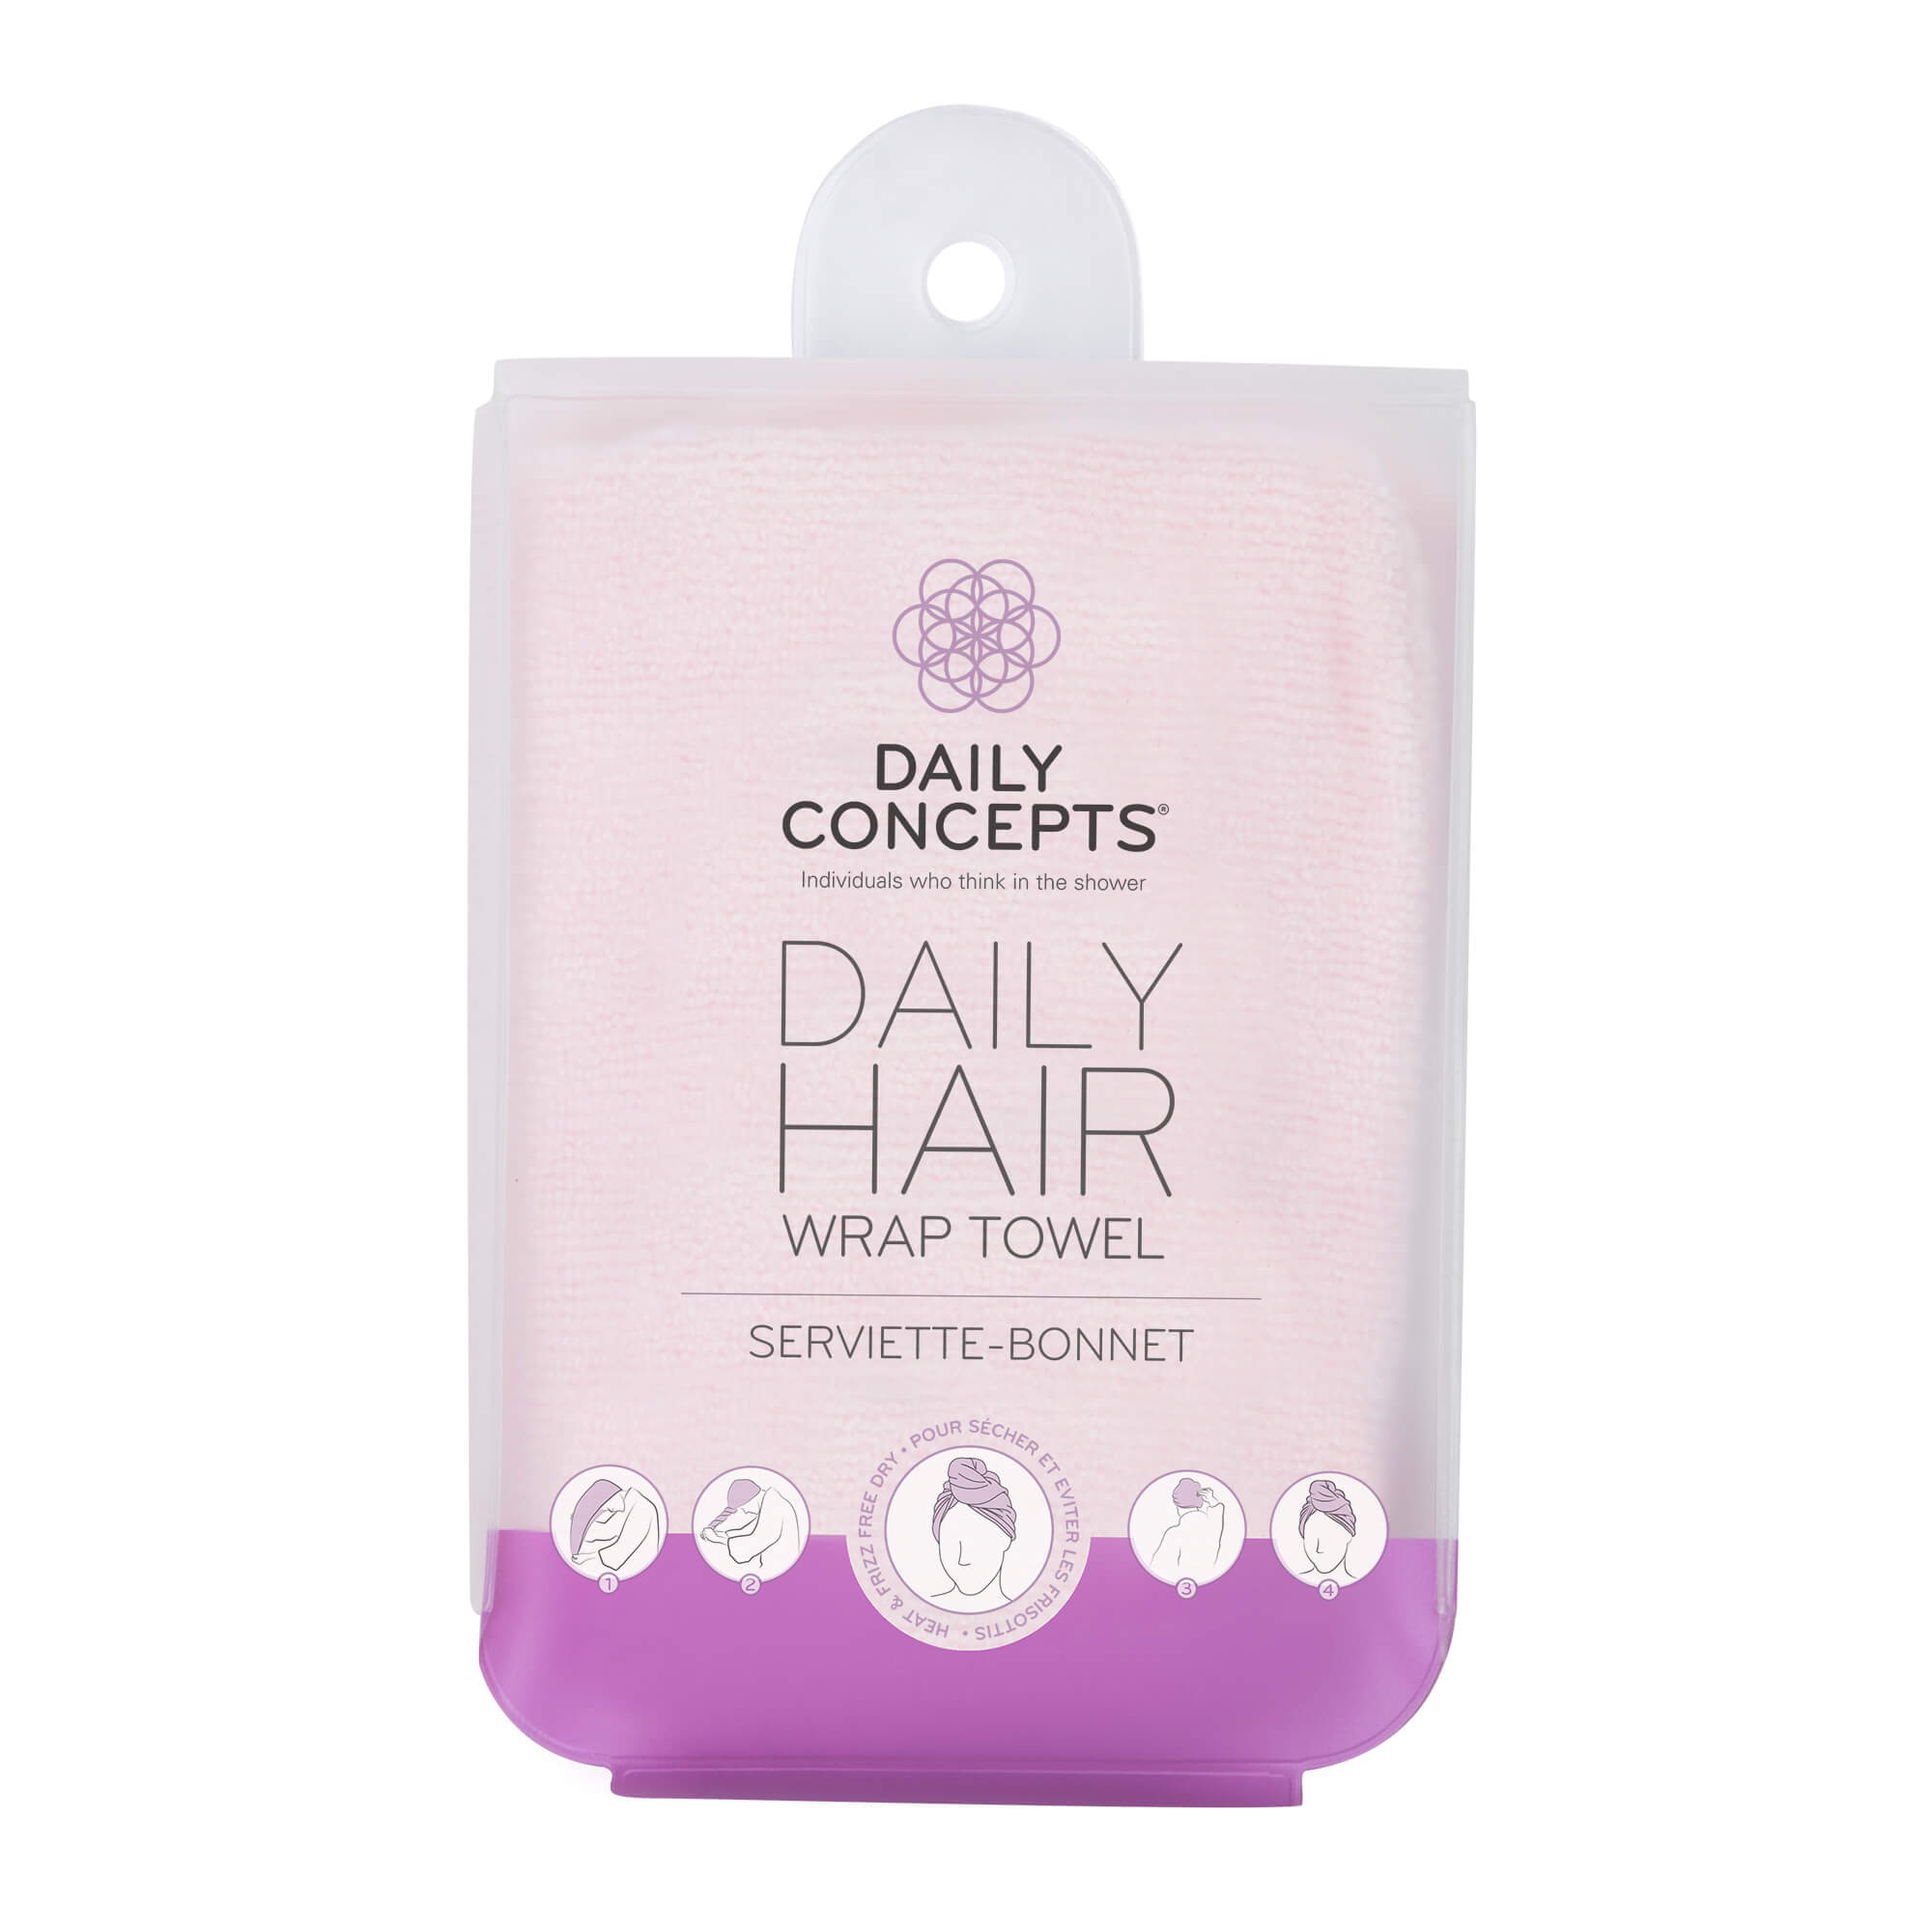 Daily Hair Towel Wrap by Daily Concepts luxury Spa goods – DAILY CONCEPTS